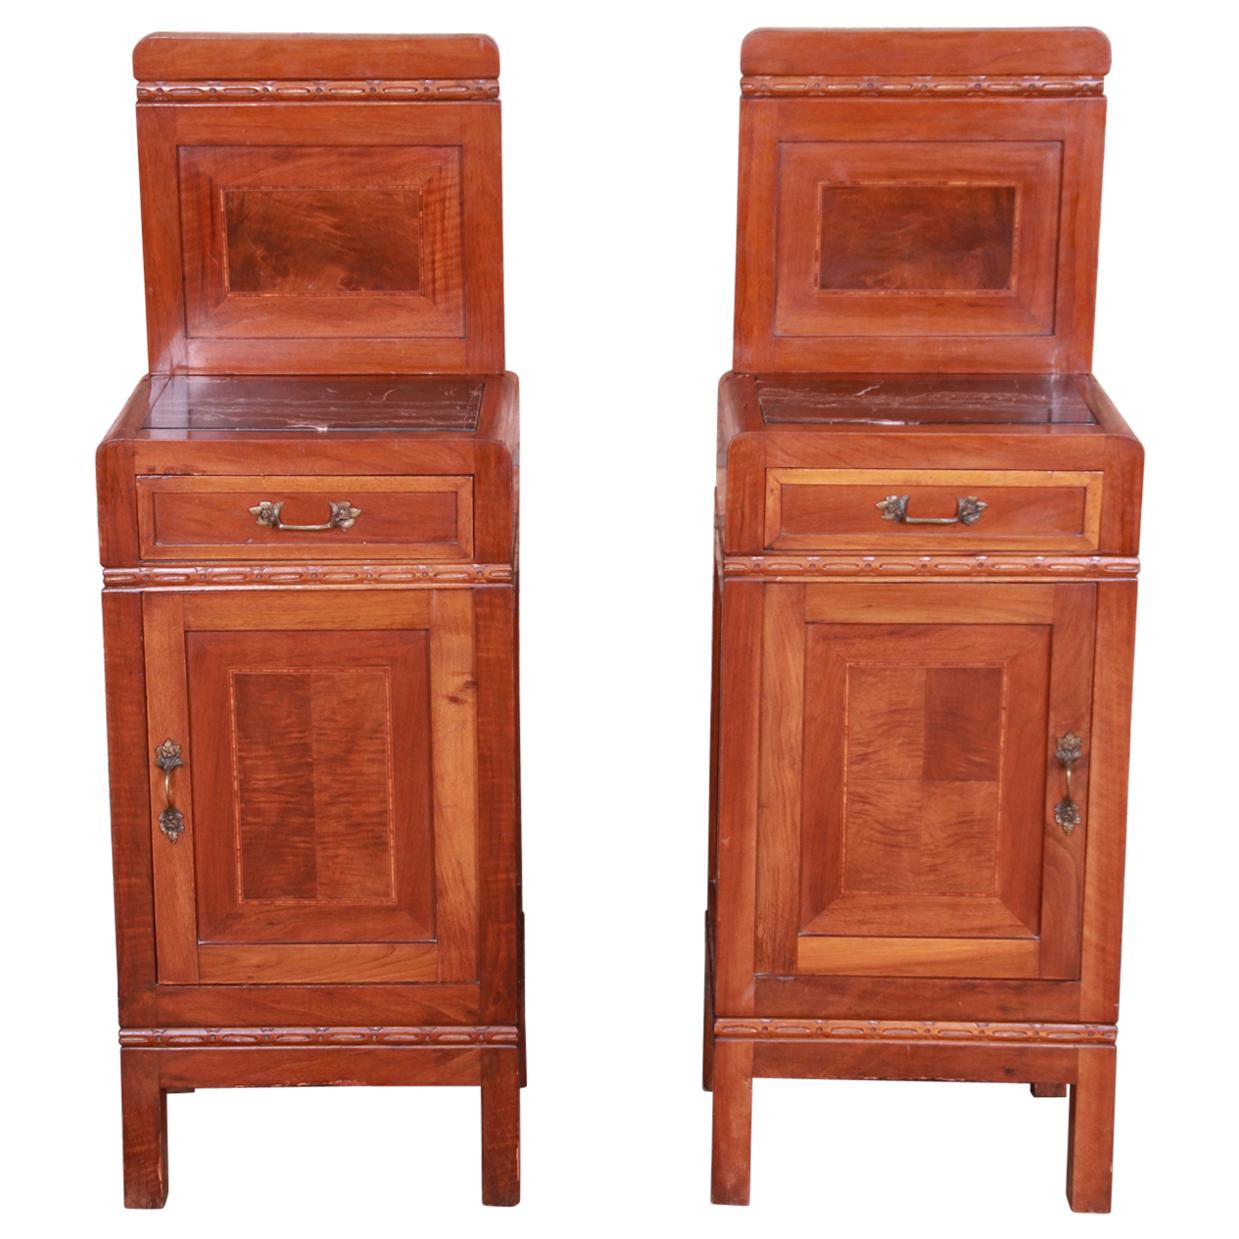 Antique French Art Deco Marble Top Mahogany Nightstands, circa 1920s